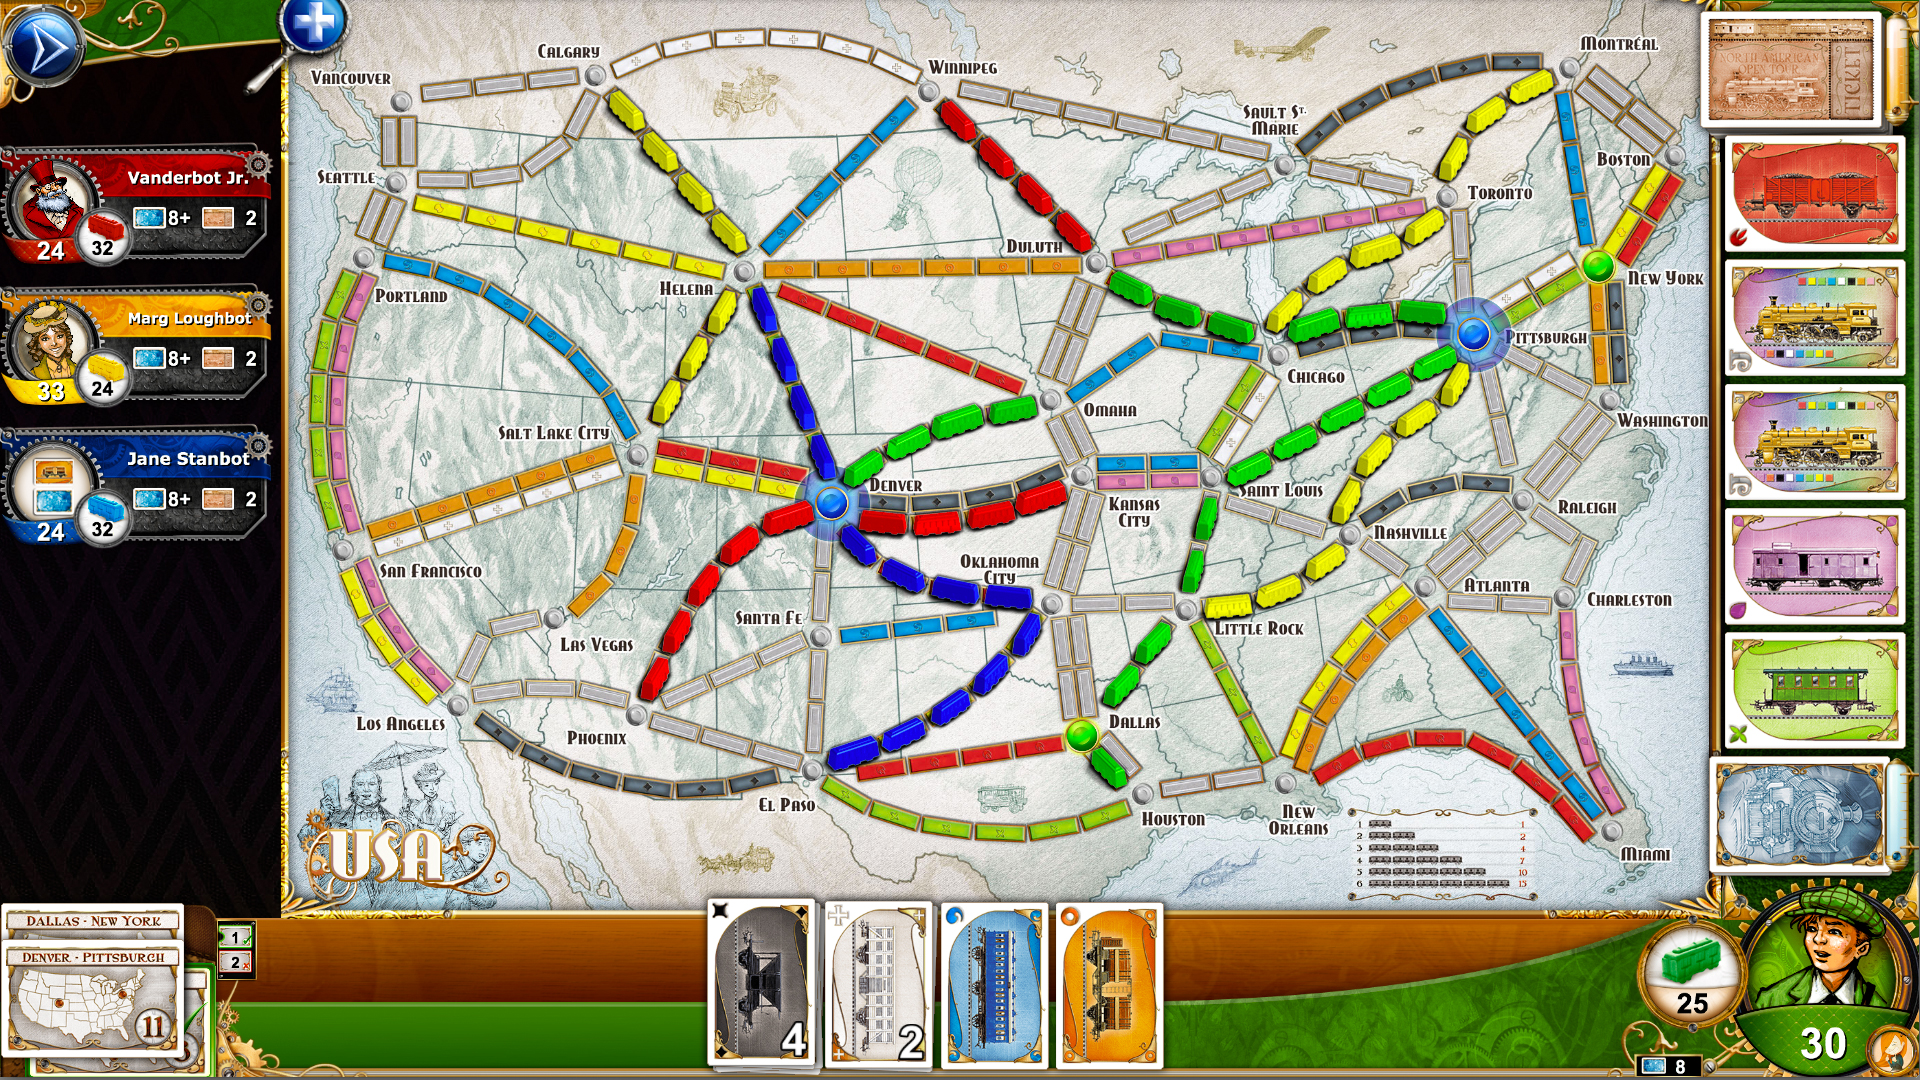 Download Ticket to Ride Full PC Game